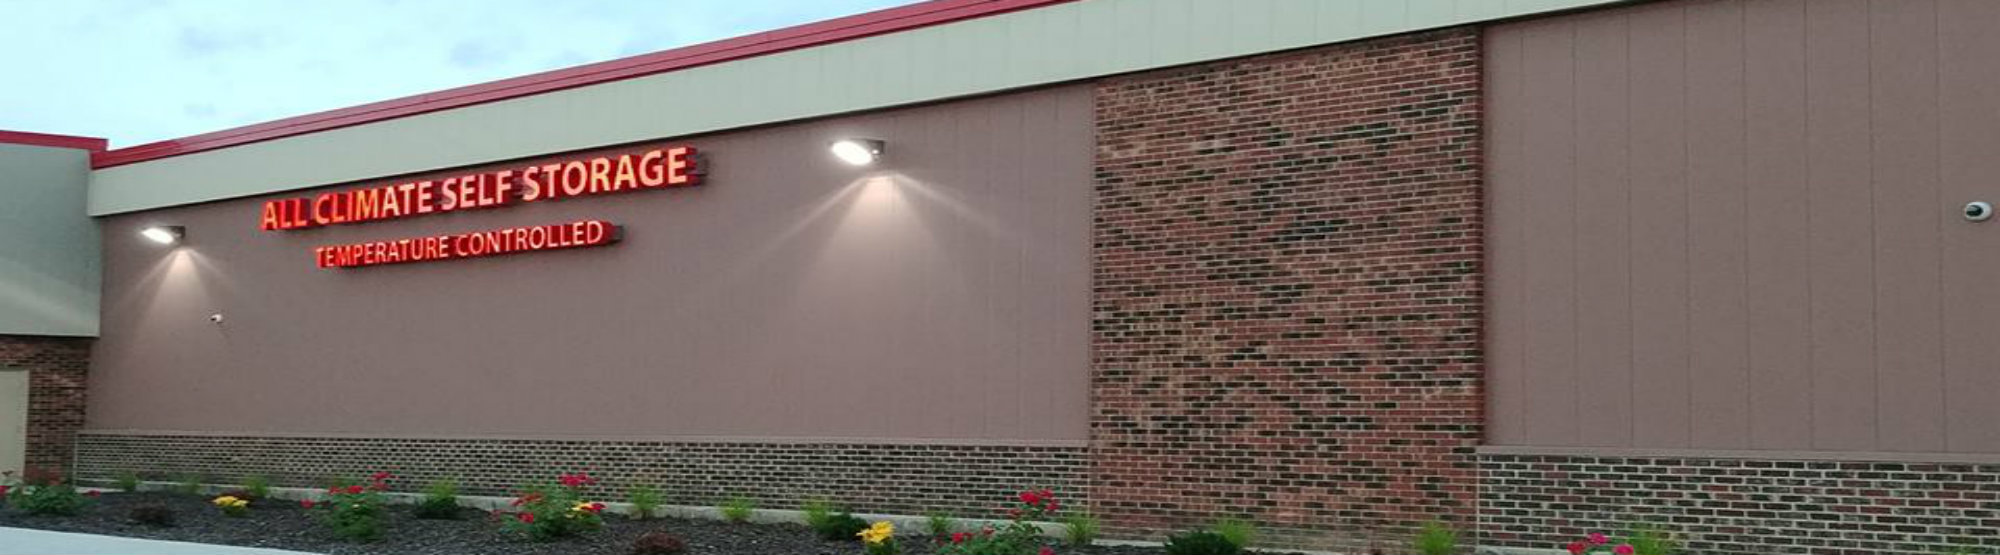 Drive-up Access at All Climate Self Storage